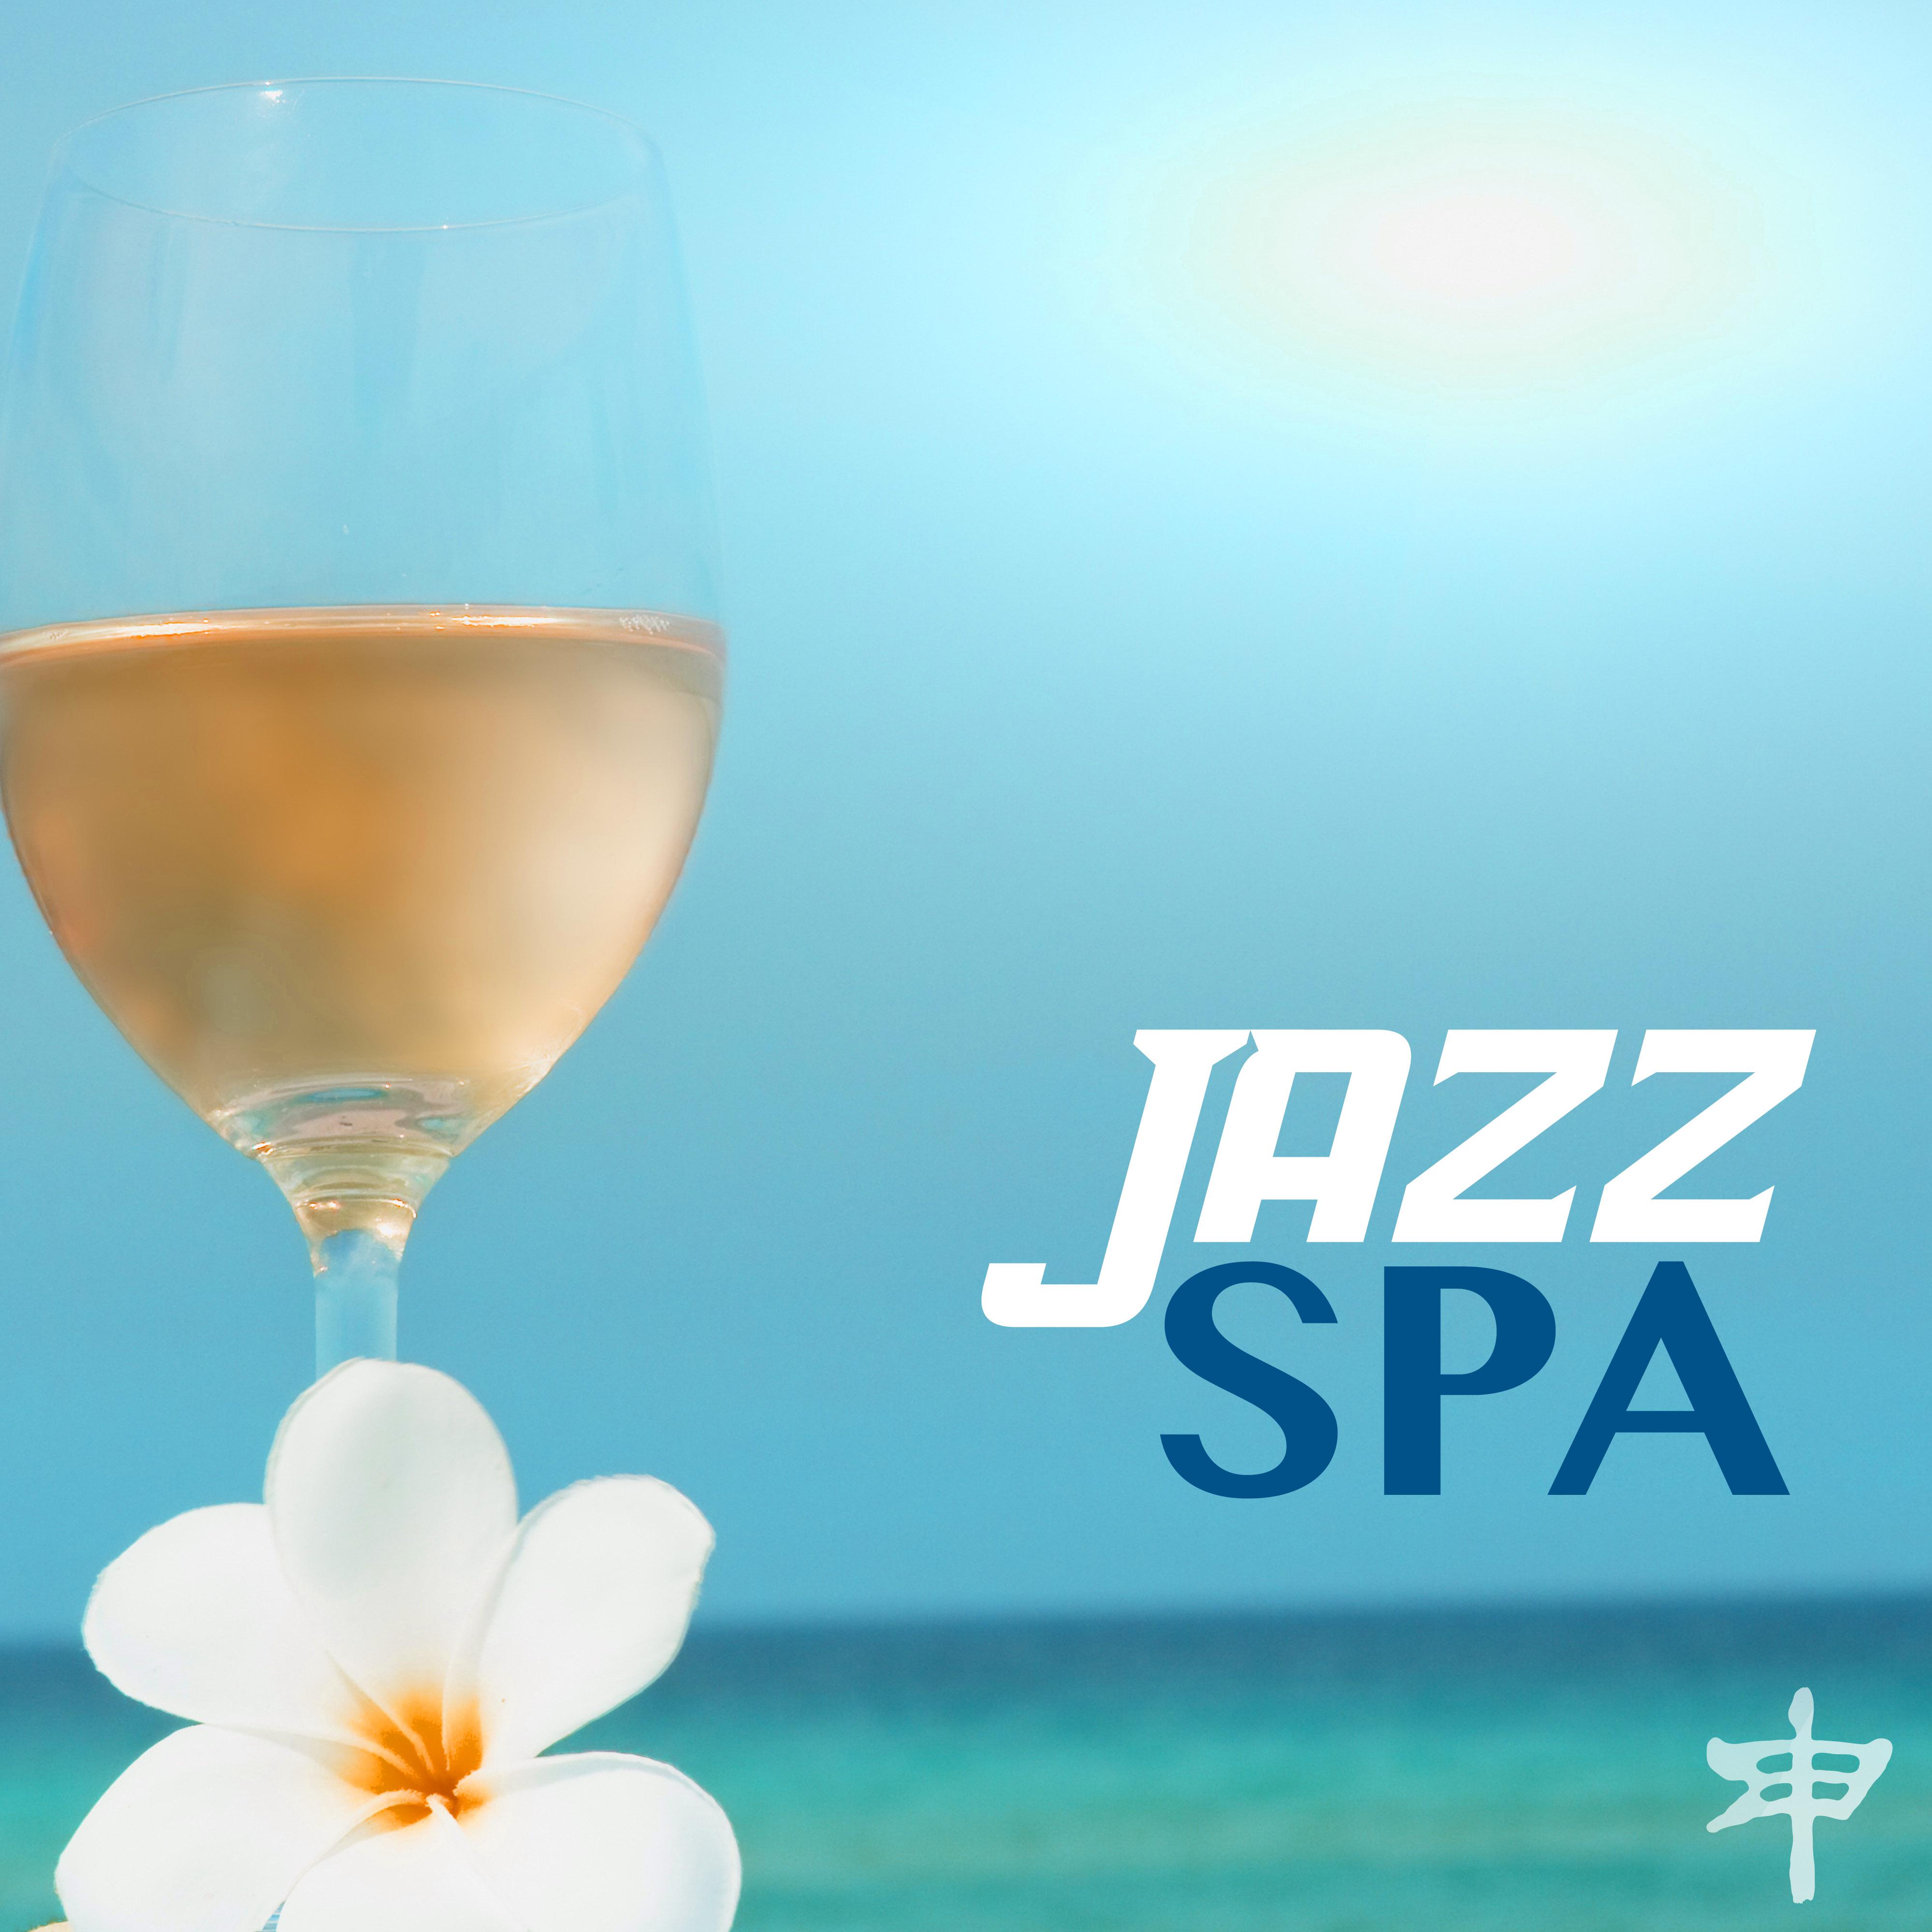 Jazz Spa - Easy Listening Guitar & Sax Relaxation Music for Hotel Lounge, Aiplanes & Wellness Center